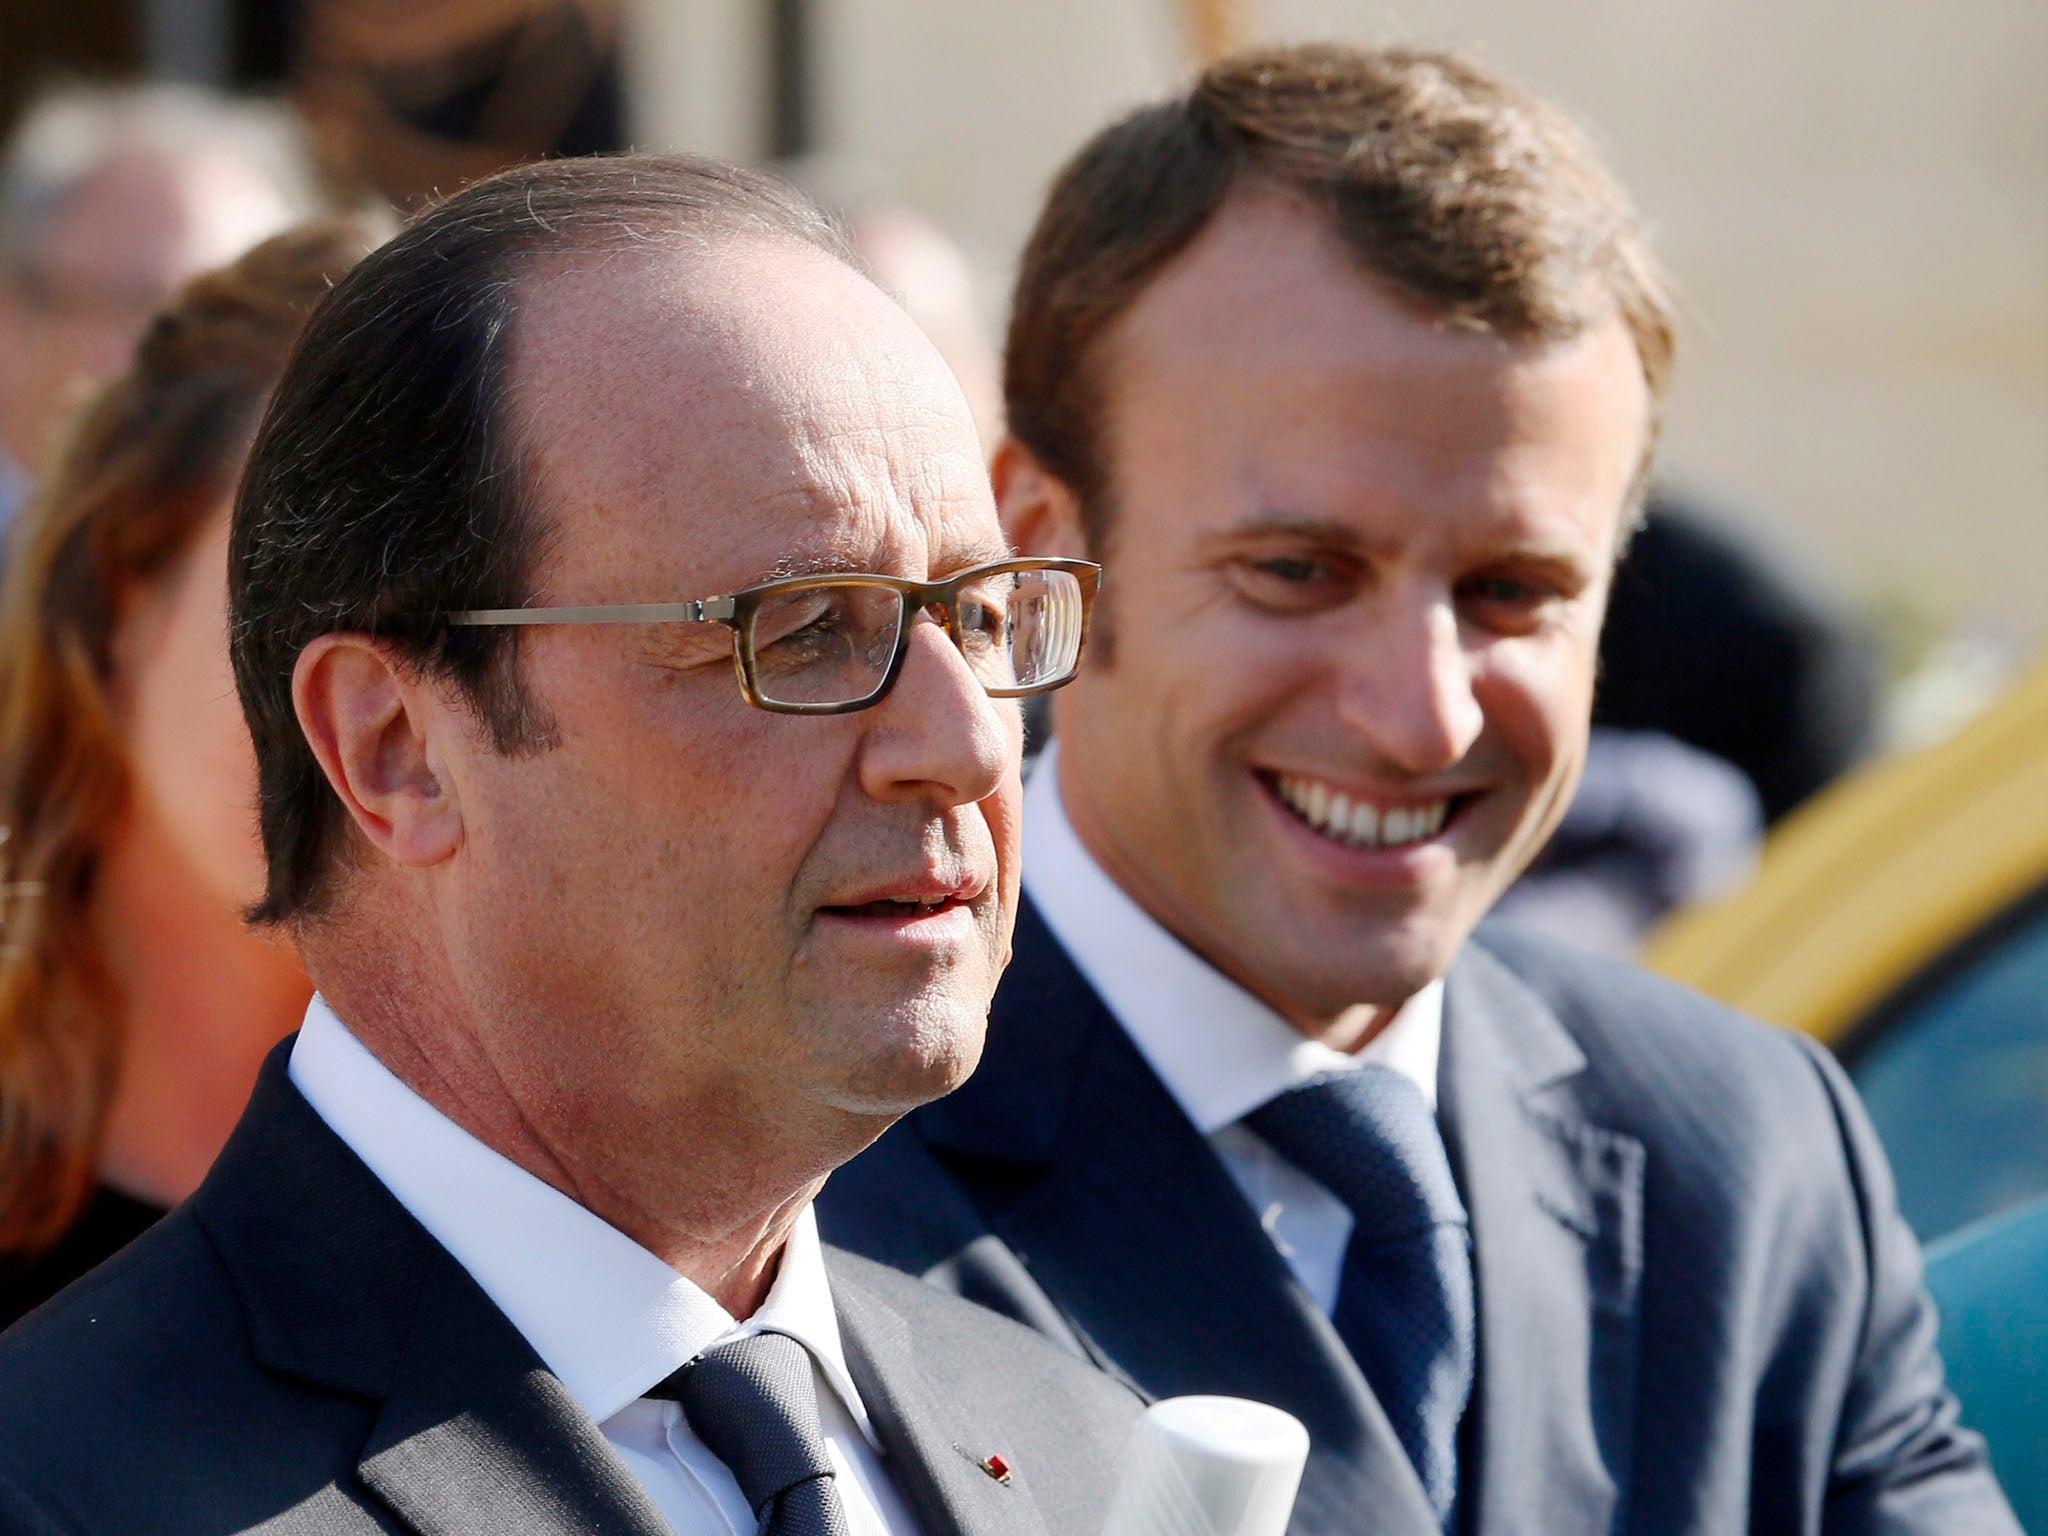 Economy minister Emmanuel Macron French, right, smiles during a speech by President François Hollande in the Elysee Palace gardens, but tensions between the two men appear to be rising